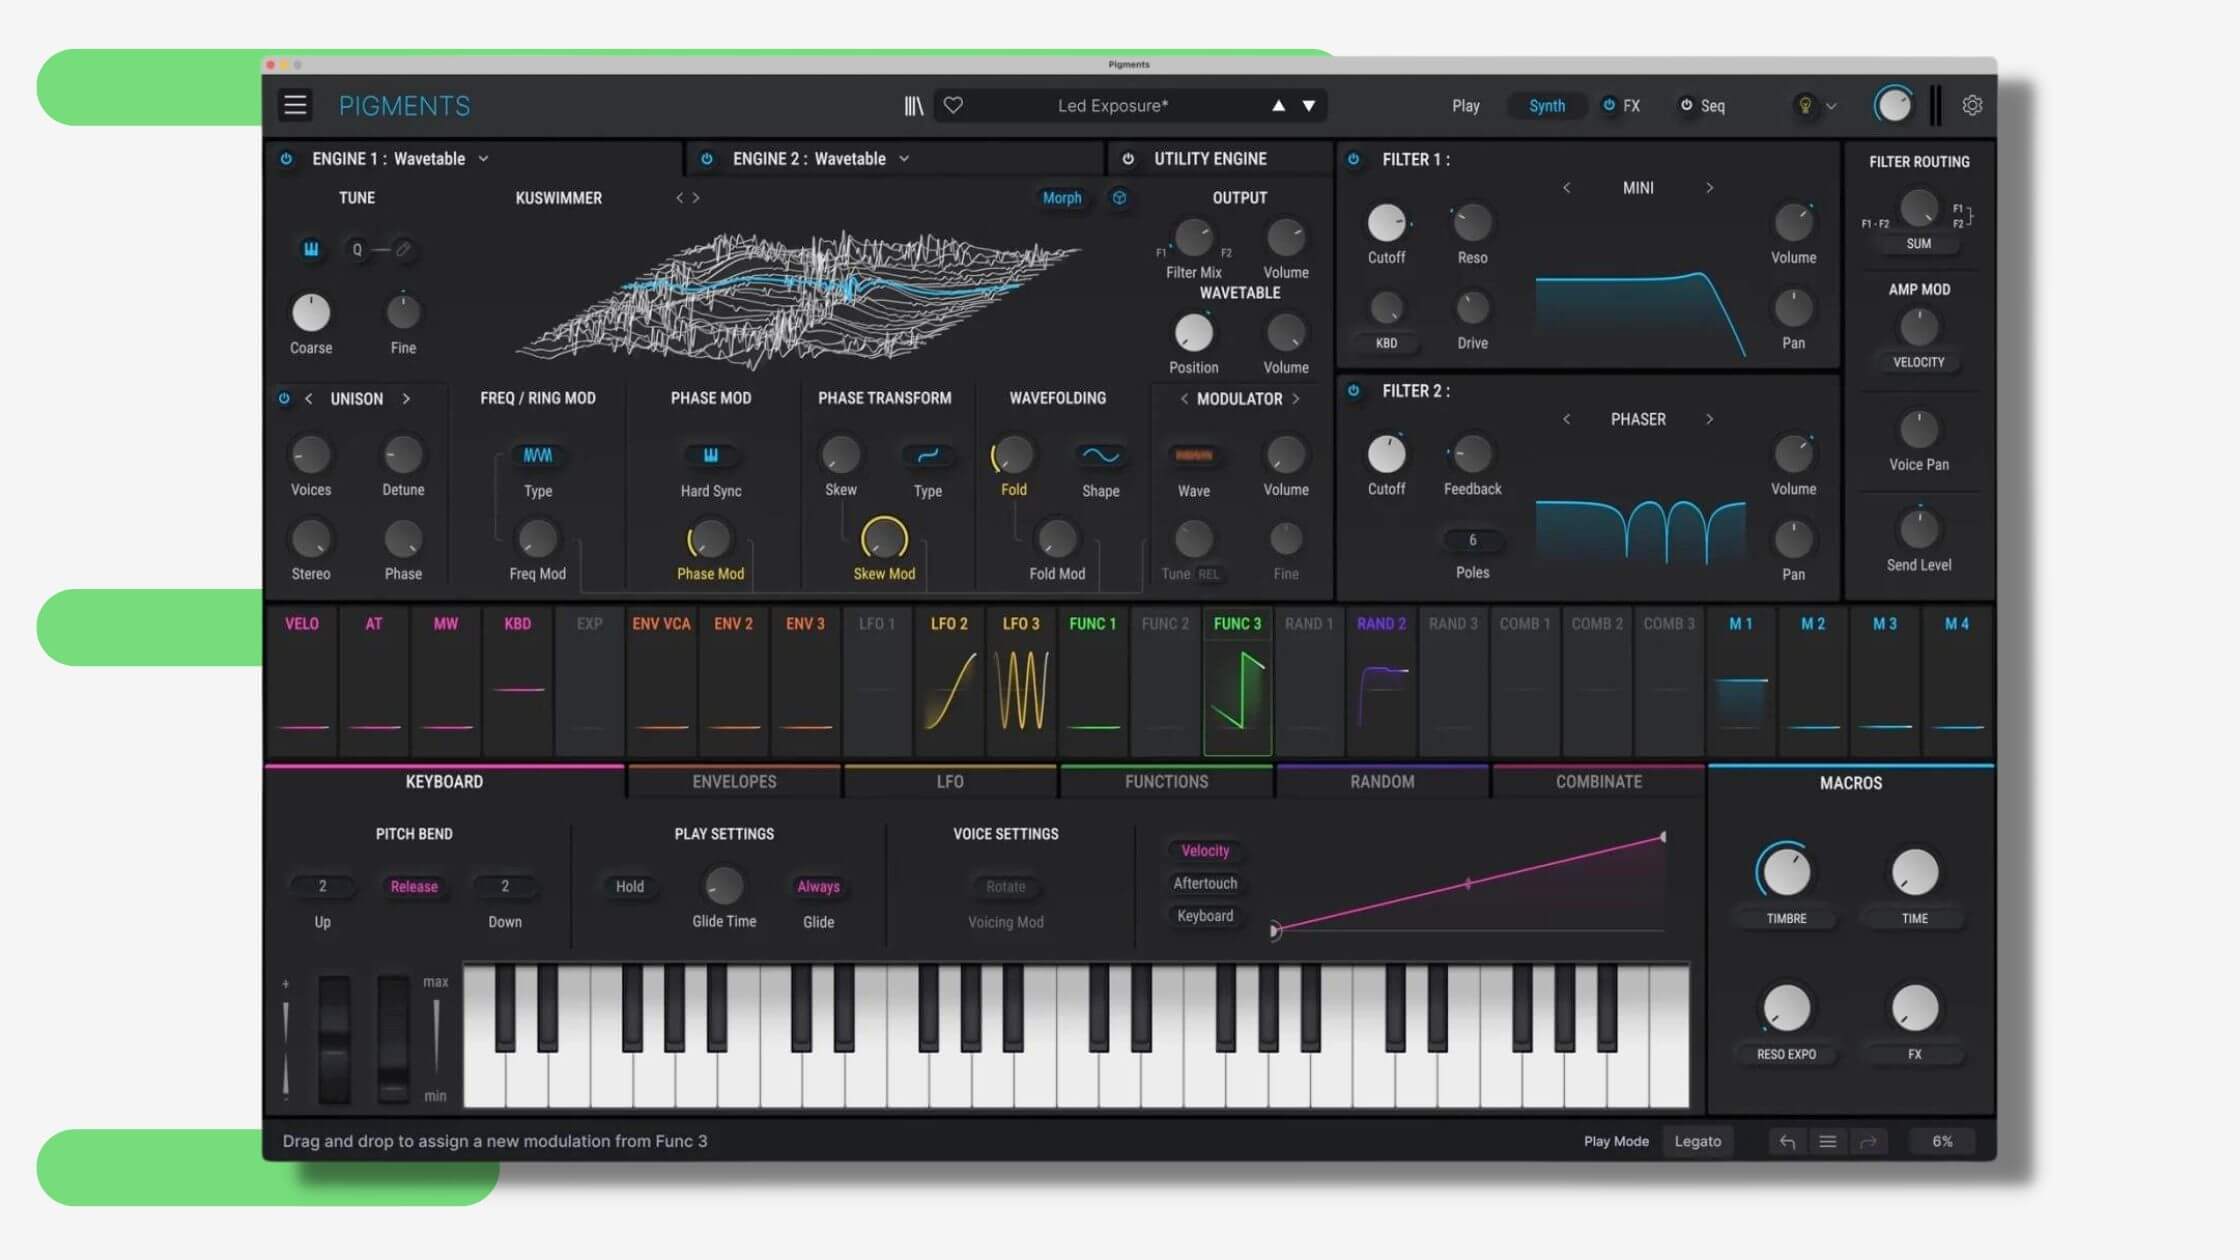 Pigments 4 is here with lots of new features for deep sound design sessions